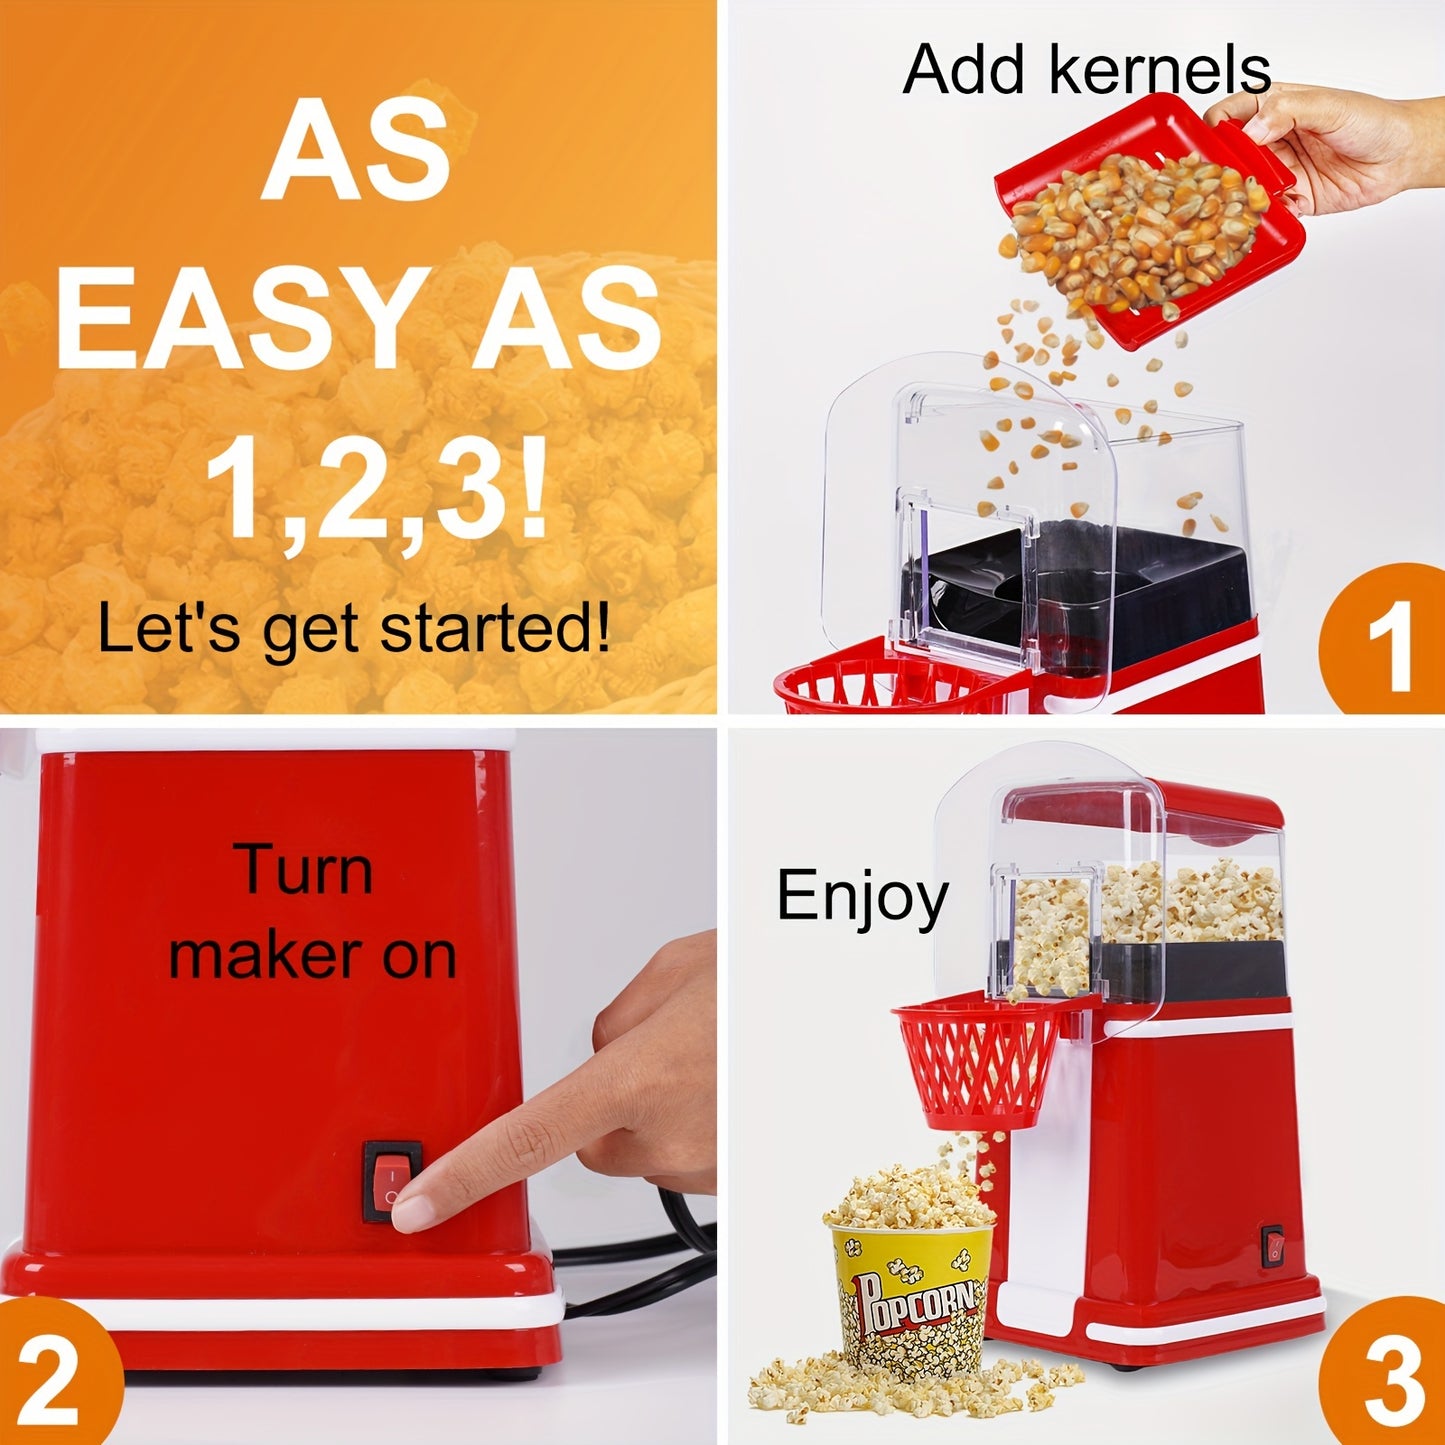 VAVSEA Hot Air Popcorn Popper, Retro Popcorn Maker, 1200W Electric Popcorn Machine, Oil Free, 3.3lb for Home Party Kids, New, Red Bee's to Find